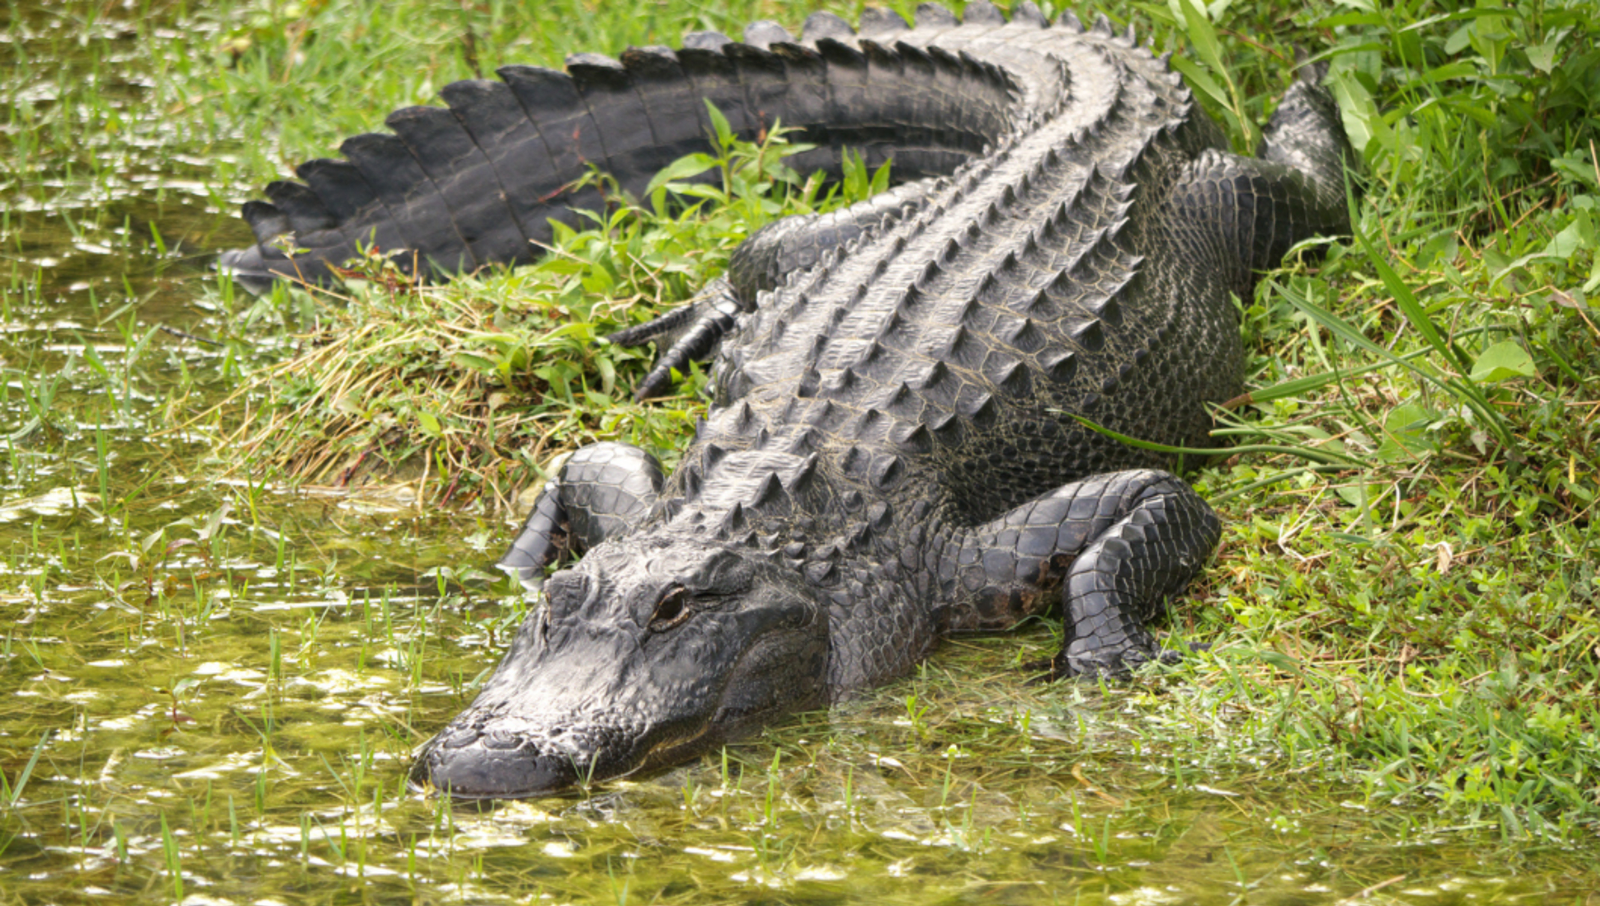 large alligator in green swamp waters 